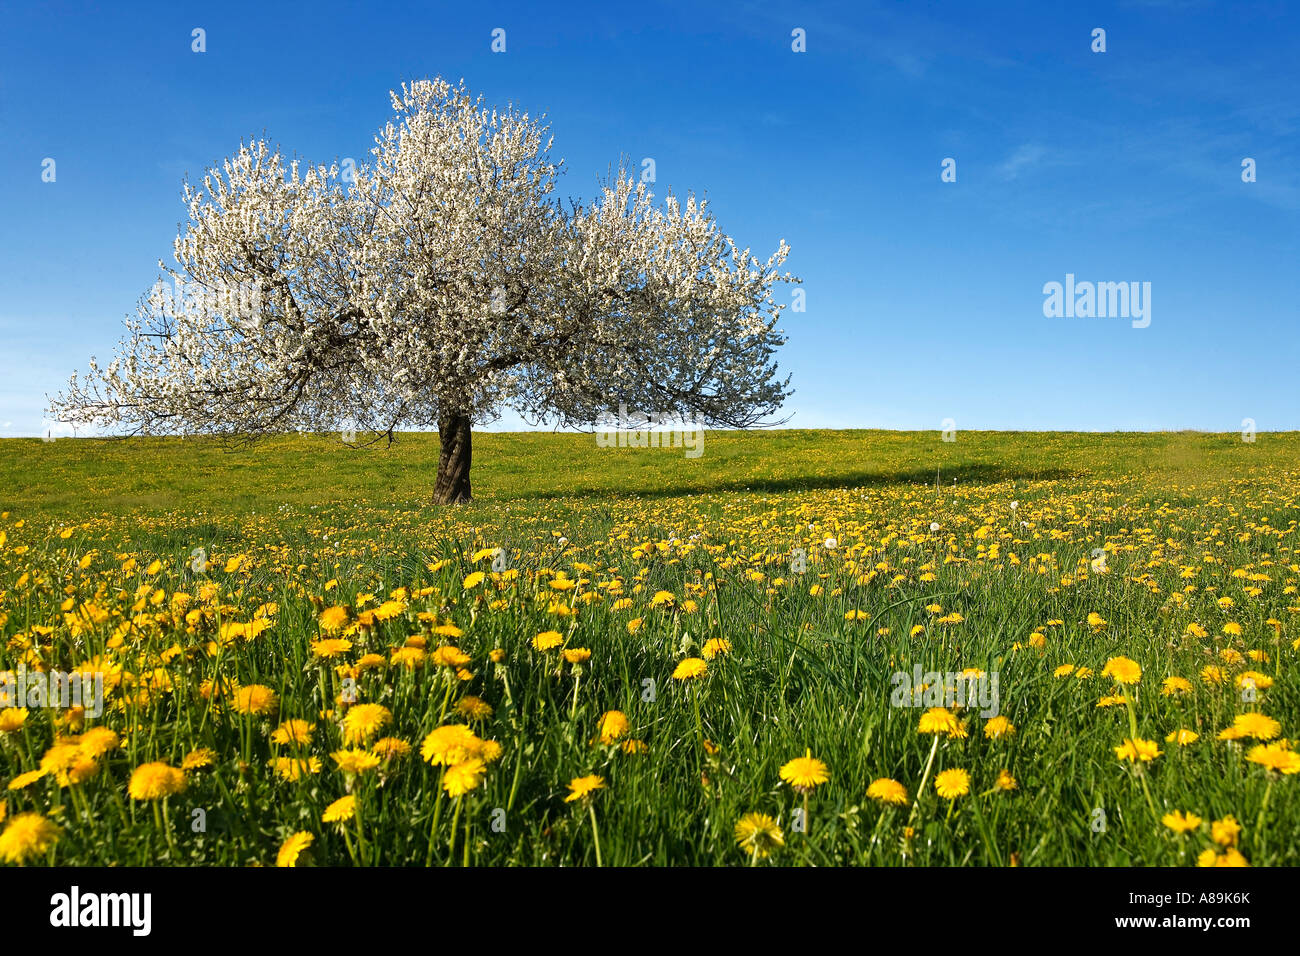 Meadow with dandelions Taraxacum officinale) and a blossoming cherry tree (Prunus avium), Sense district, canton, Fribourg, Swi Stock Photo